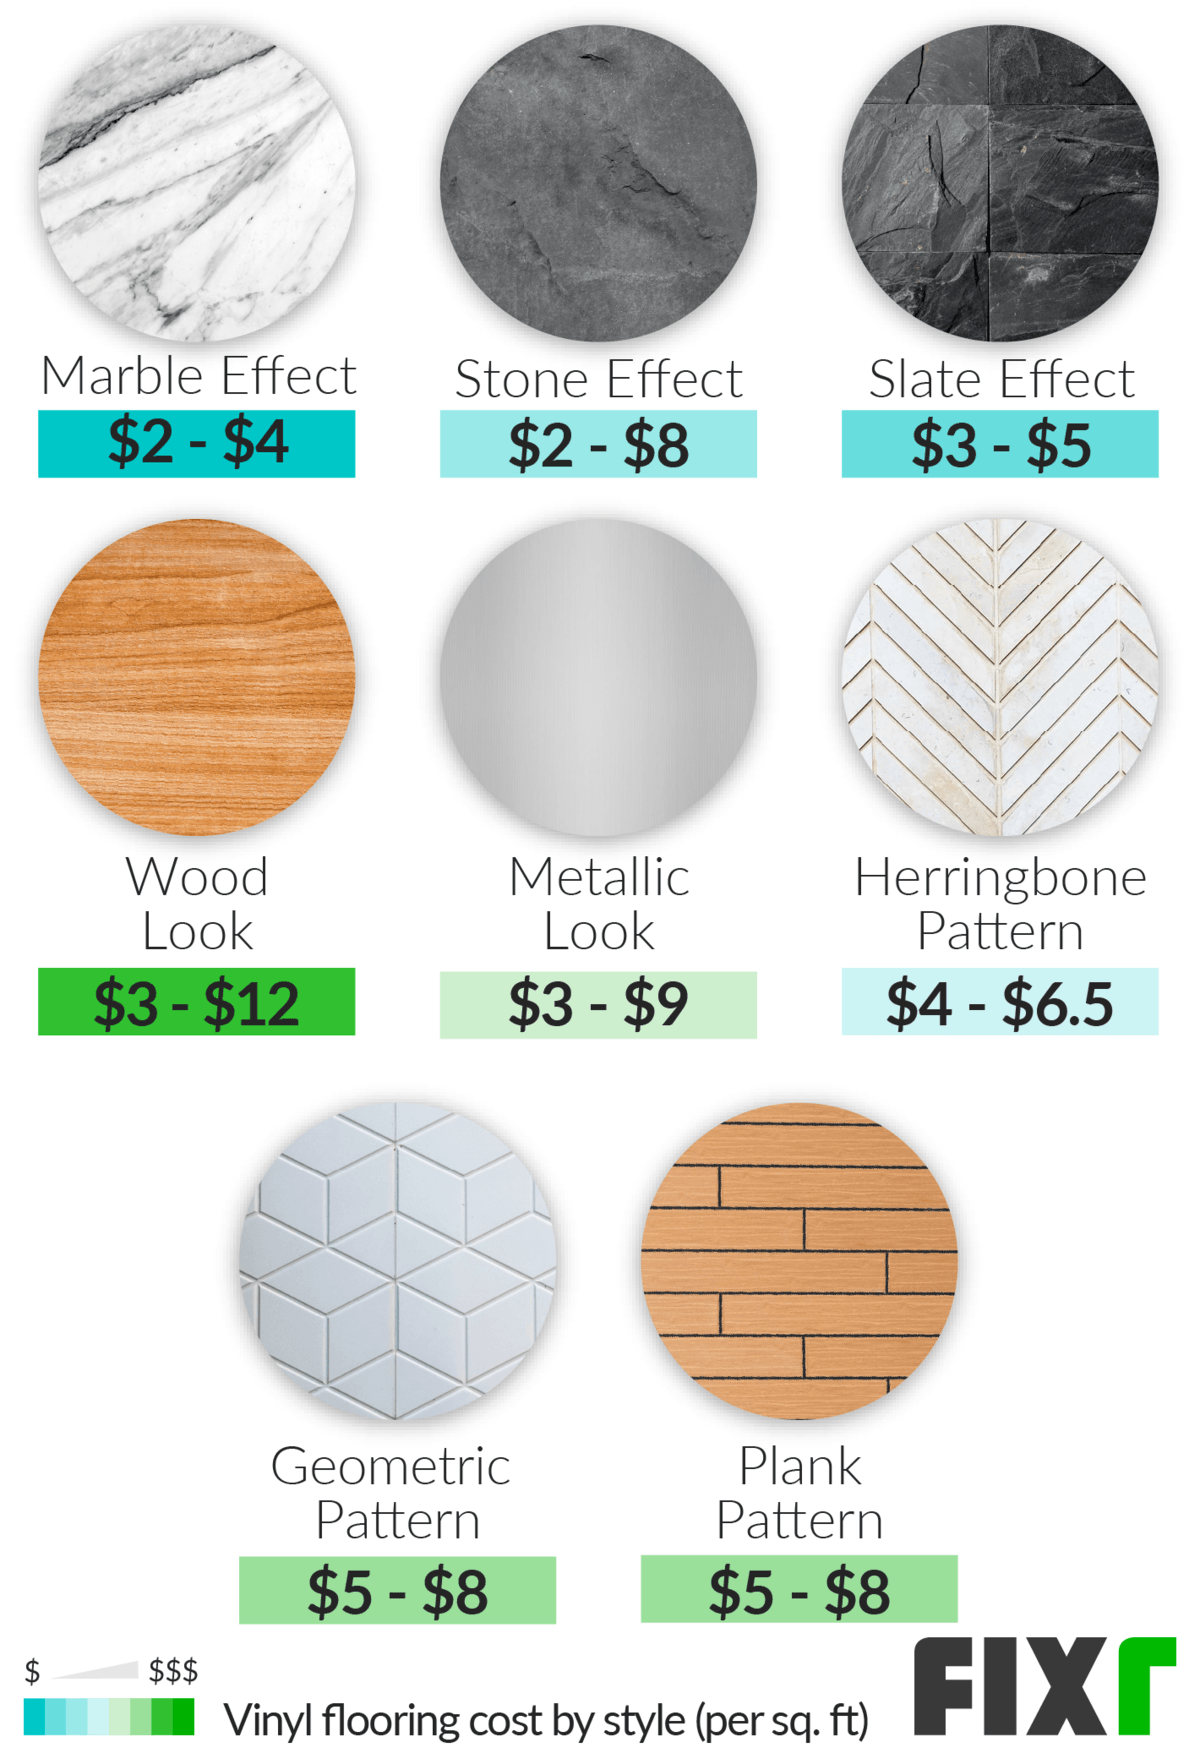 2021 Cost To Install Vinyl Flooring, How Much Does It Cost To Install 1000 Sq Ft Vinyl Plank Flooring